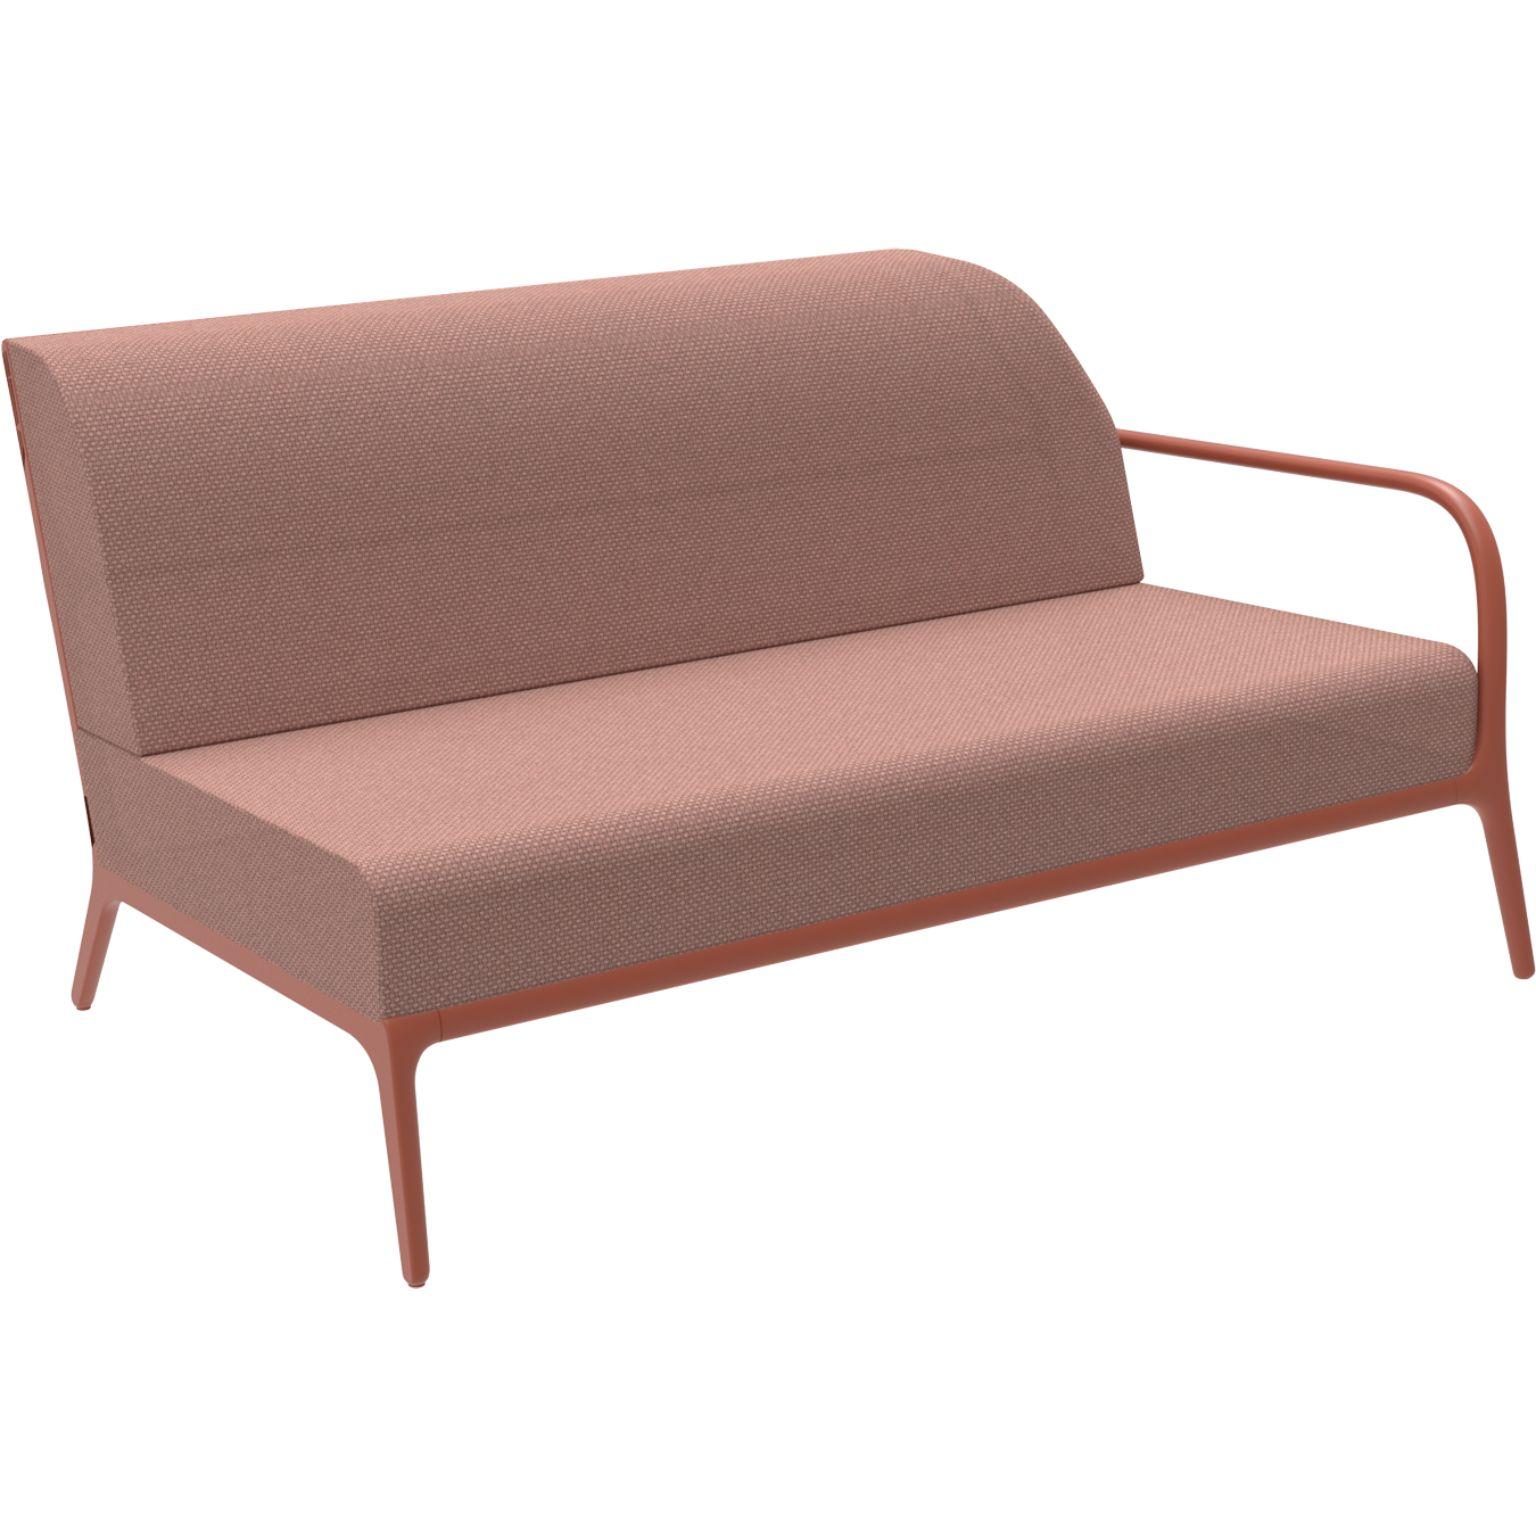 Xaloc Left 160 Salmon Modular sofa by MOWEE
Dimensions: D100 x W160 x H81 cm (Seat Height 42cm)
Material: Aluminium, Textile
Weight: 37 kg
Also Available in different colors and finishes. 

 Xaloc synthesizes the lines of interior furniture to